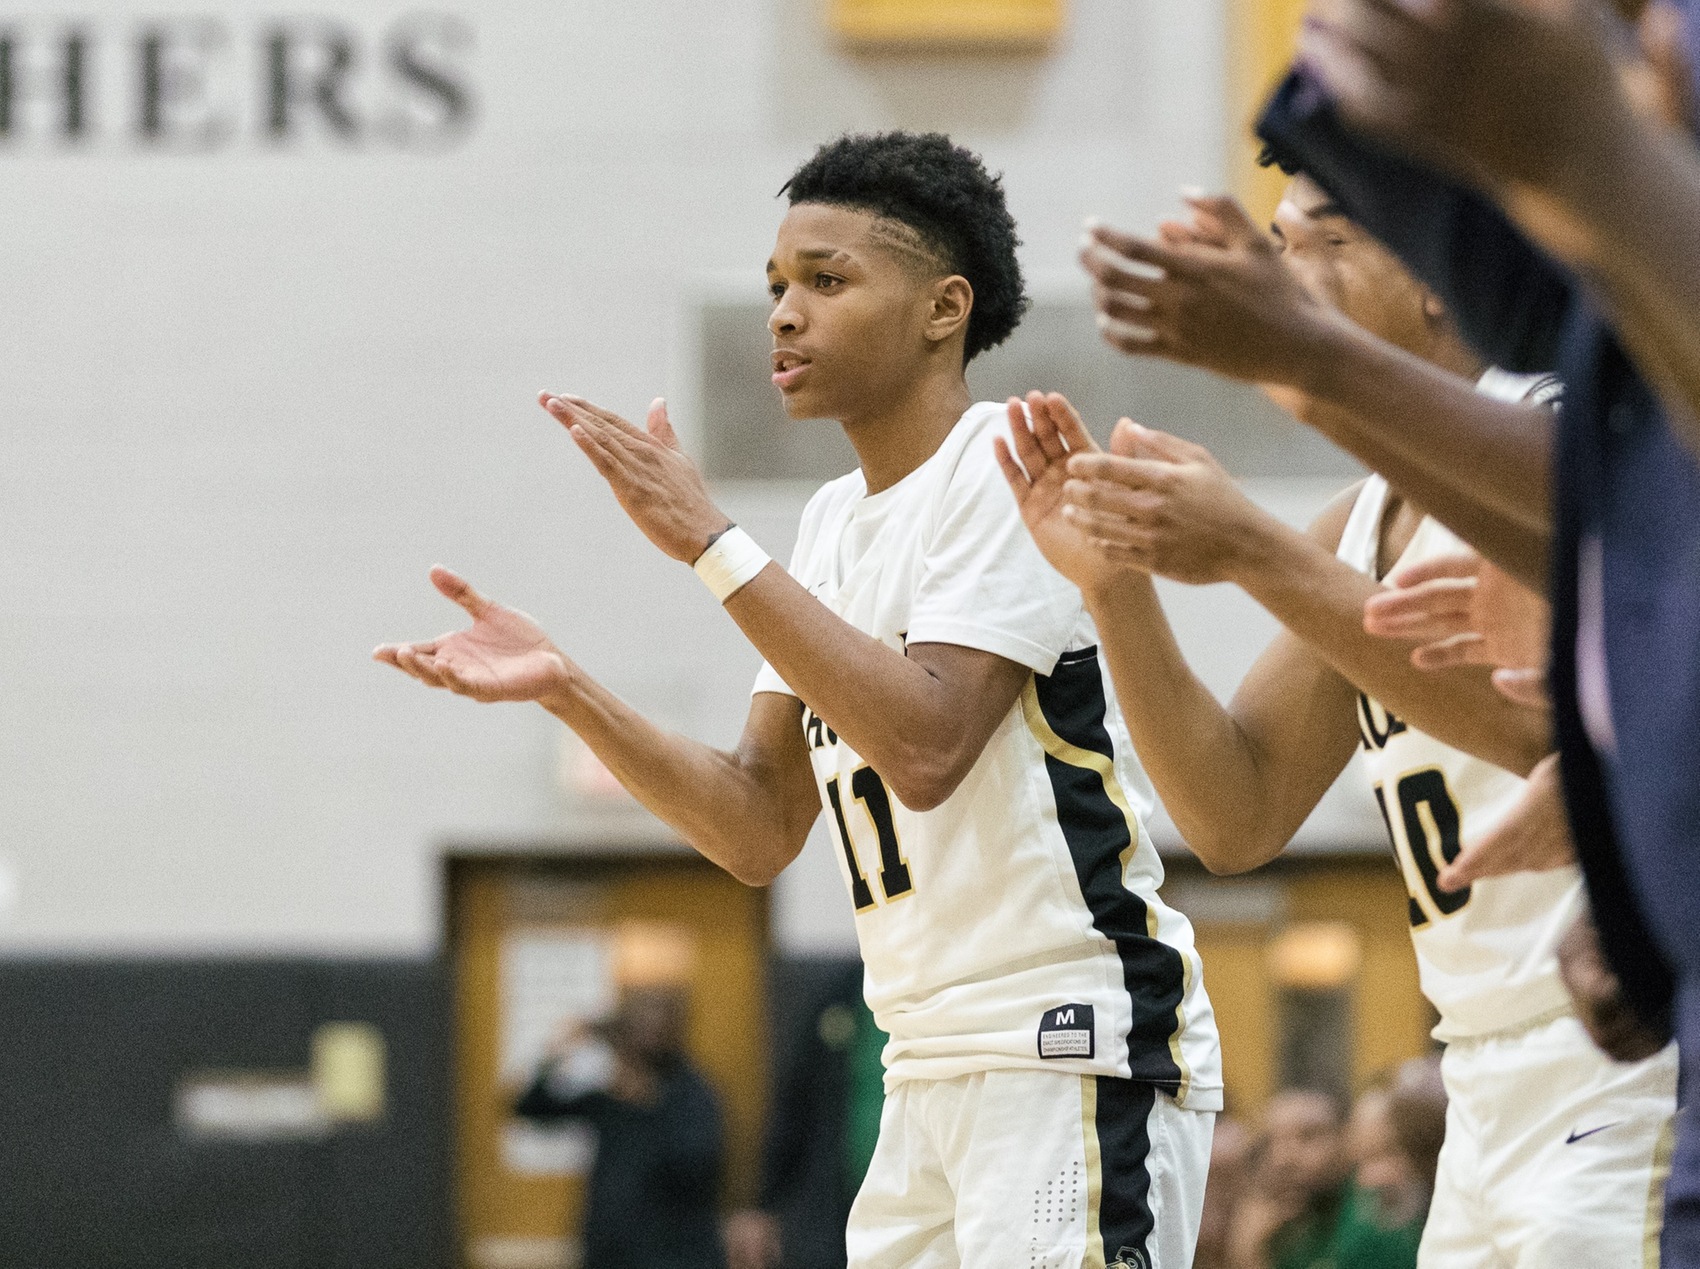 Paul VI freshman guard bursts onto national scene, with ‘Momma LaVar’ by his side